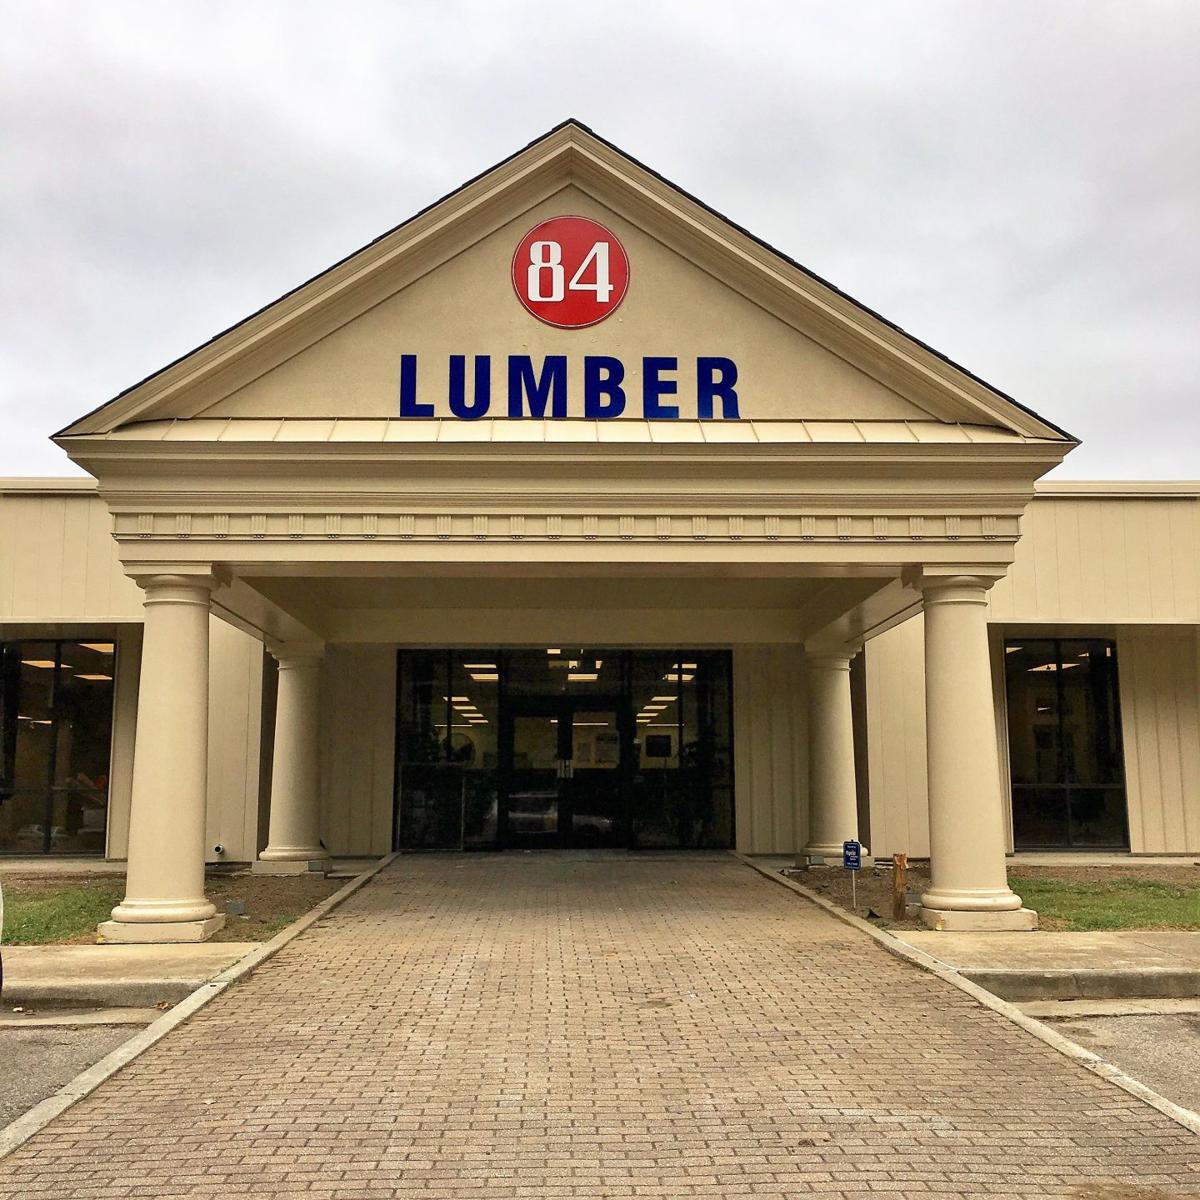 84-lumber-to-open-new-store-in-chesterfield-that-will-be-the-company-s